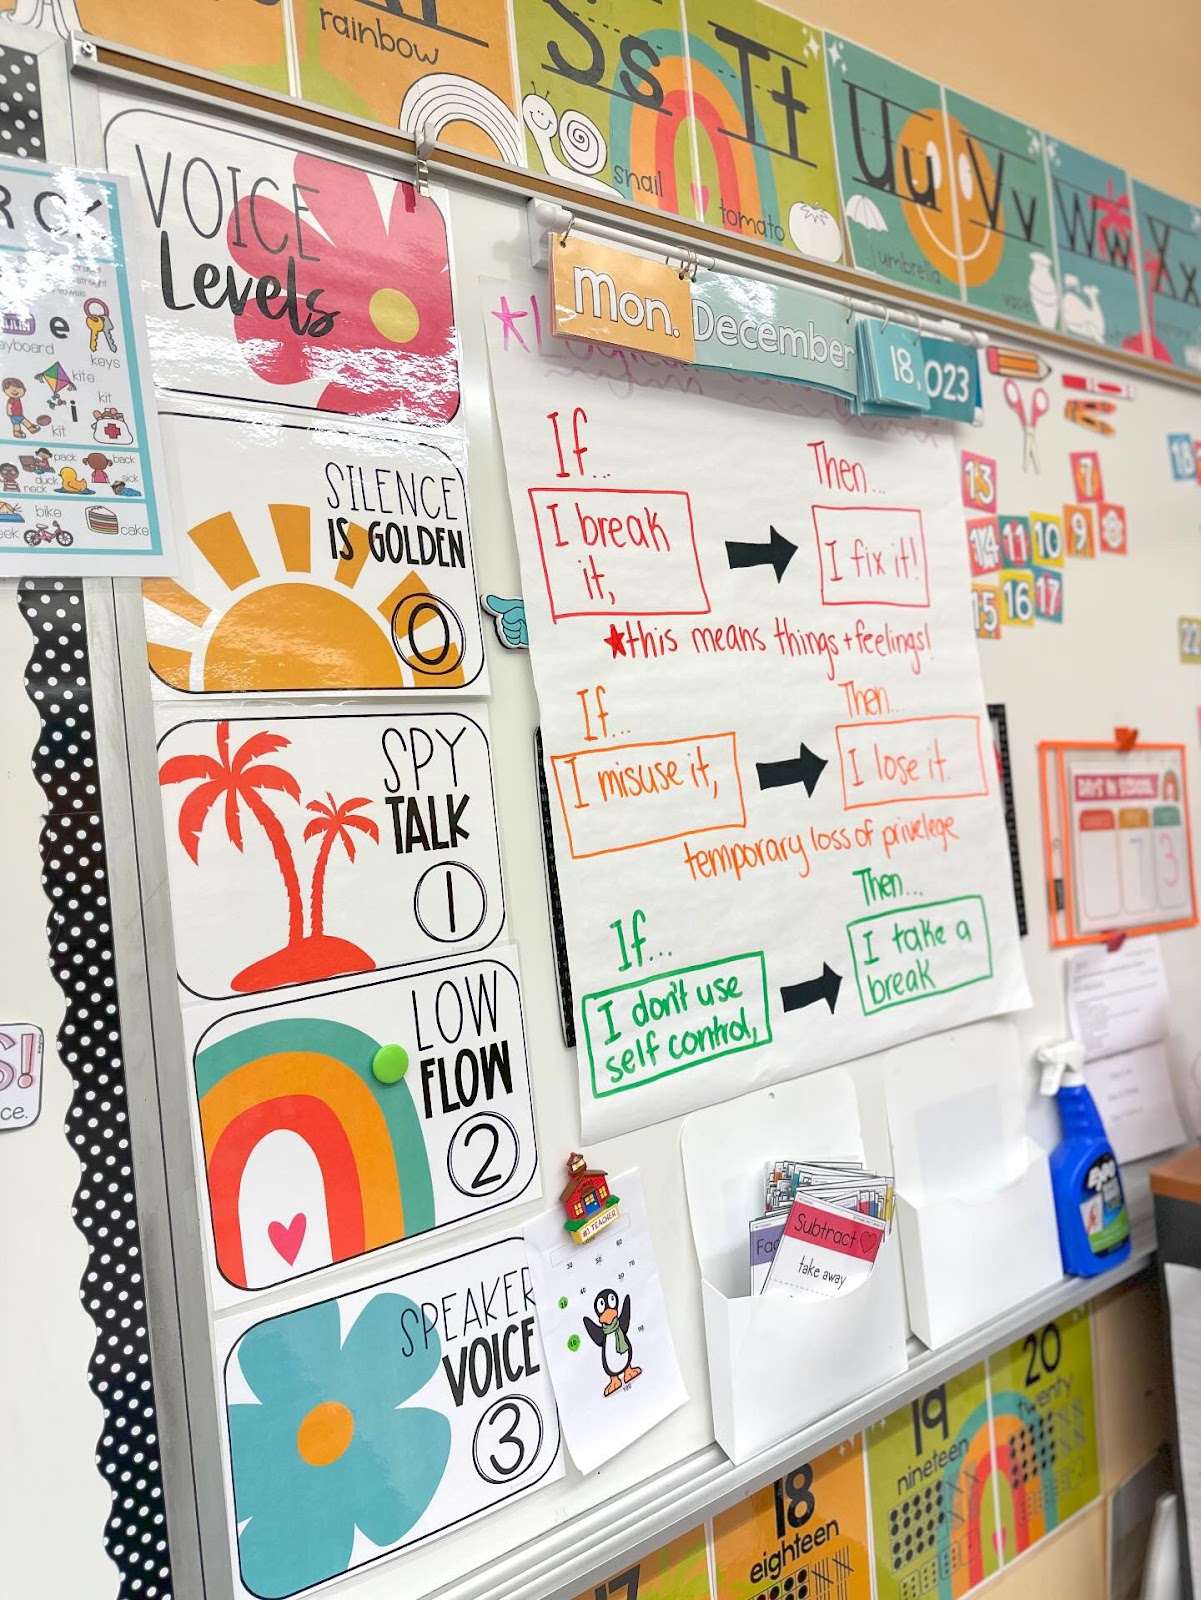 This image shows a closeup of inspiring classroom decor voice level posters display. The posters read "Silence is Golden", "Spy Talk", and "Low Flow". Each poster has a number connected to it and a tropical-themed icon. 